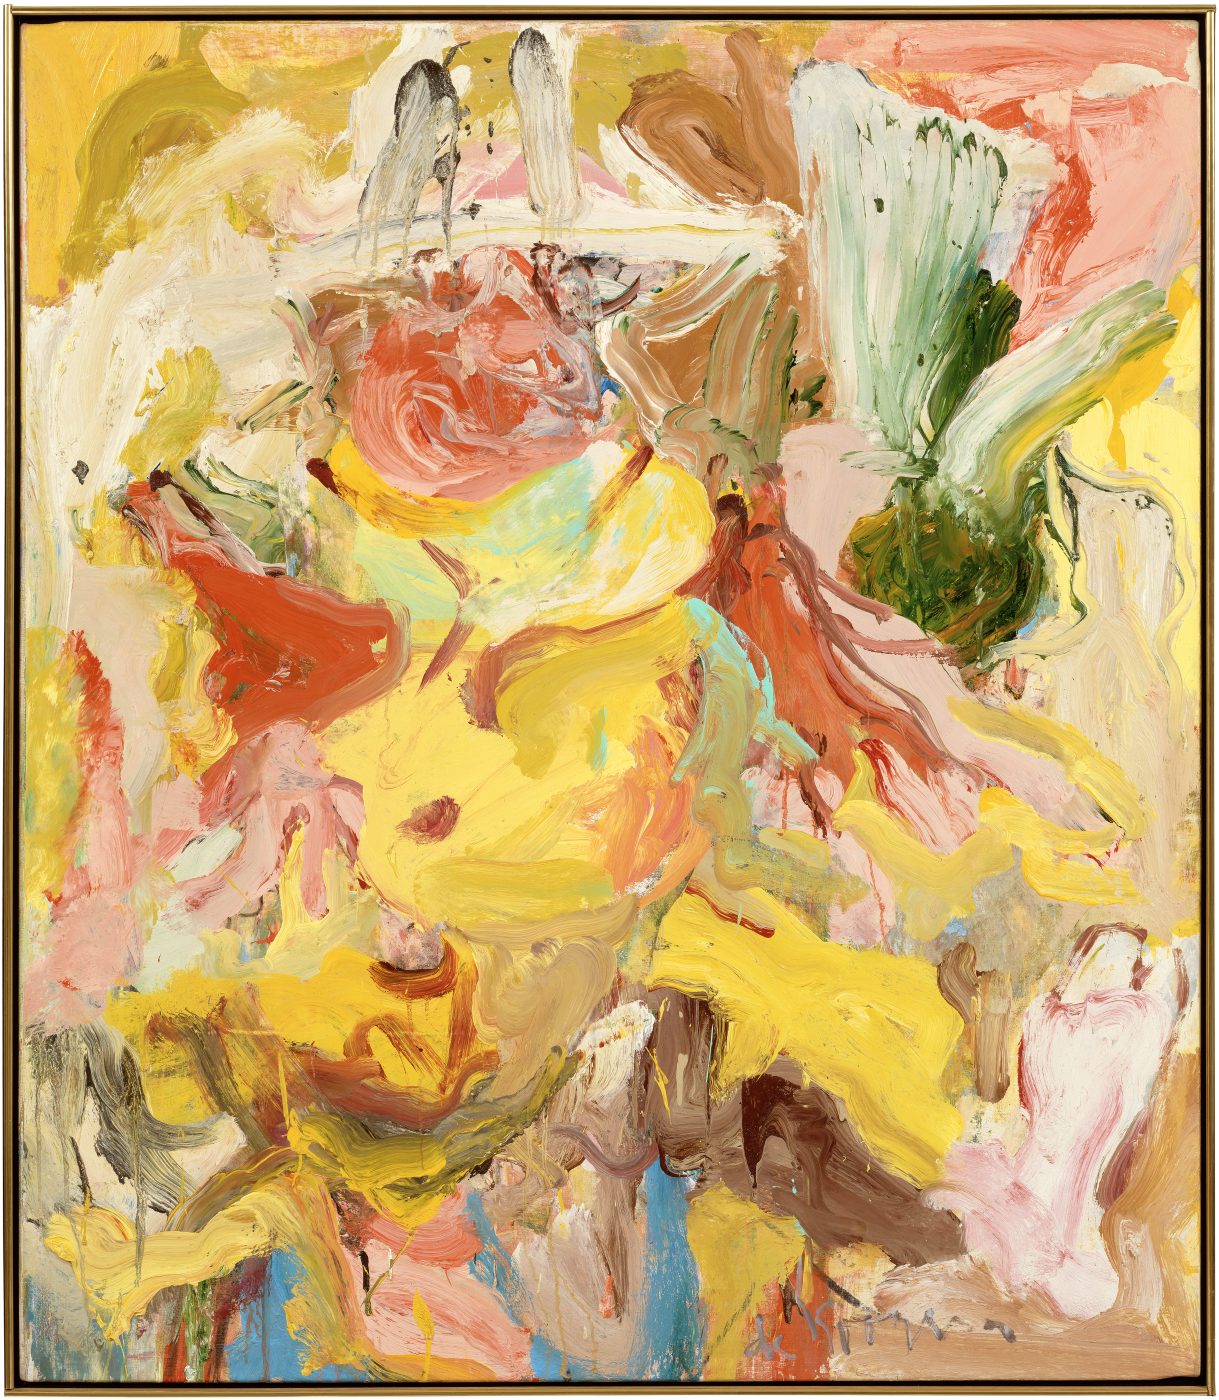 LaGuardia in a Paper Hat, 1972, by Willem de Kooning 